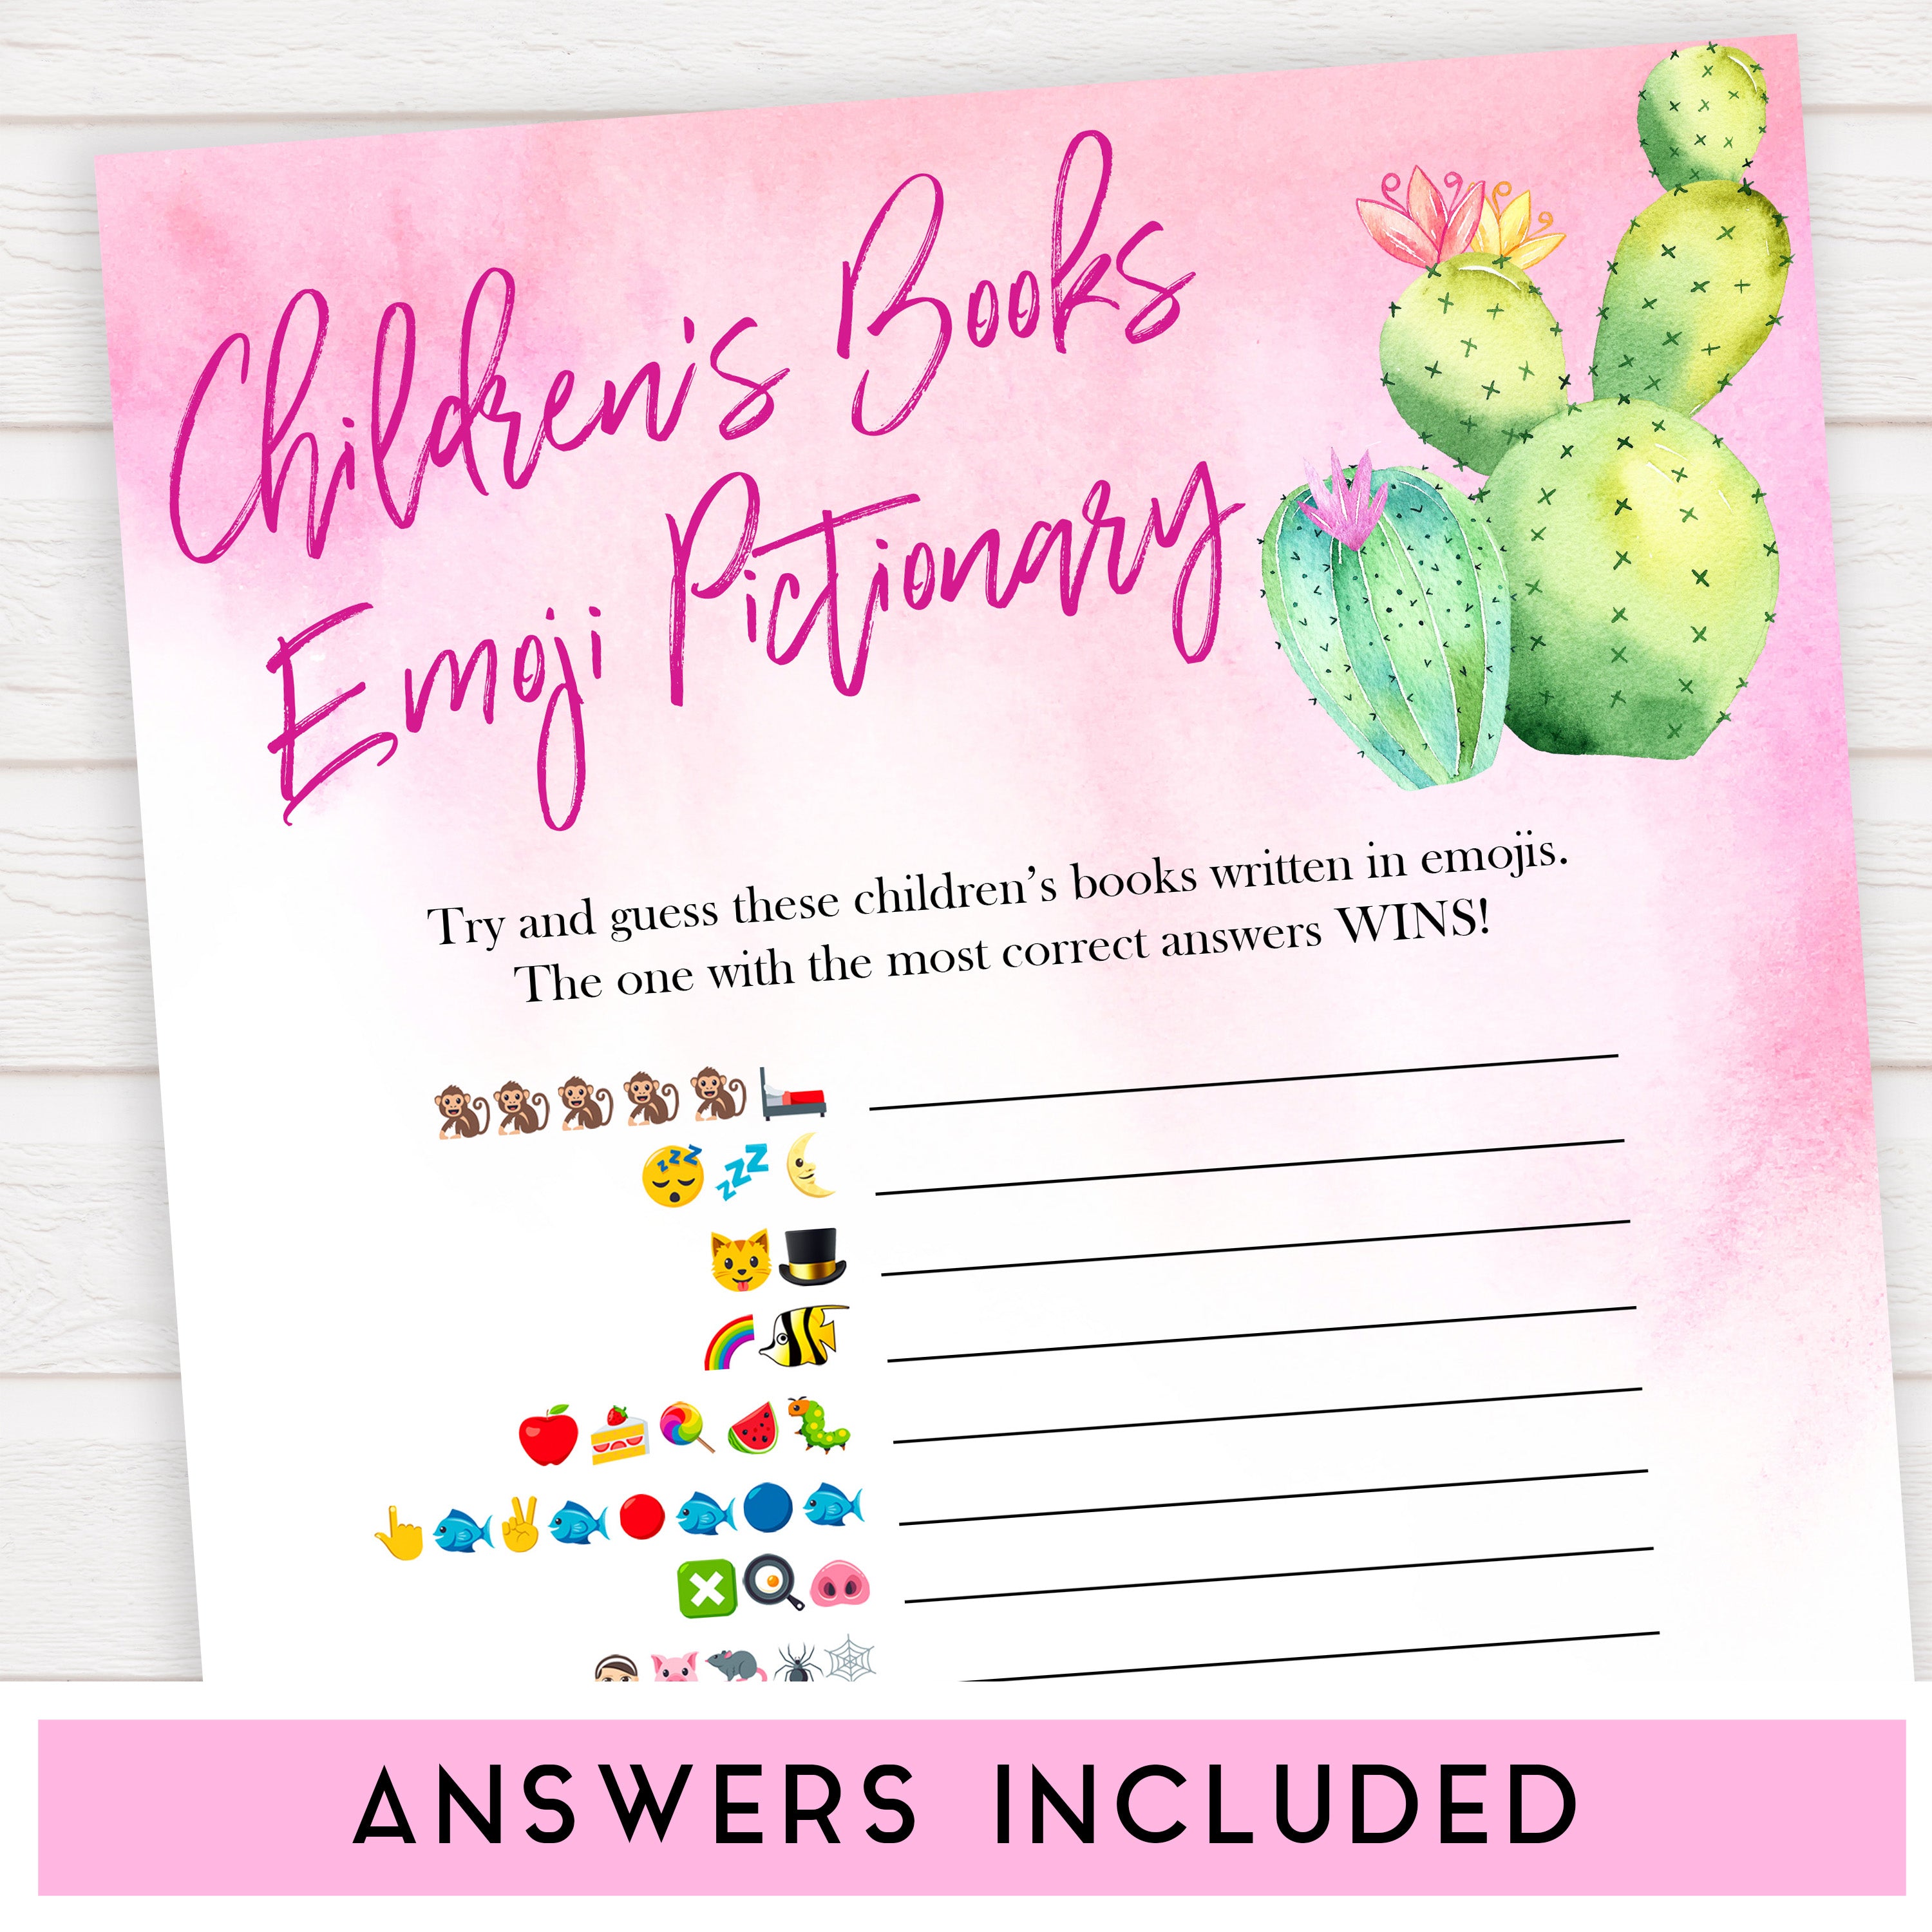 Cactus baby shower games, cactus childrens books emoji pictionary baby game, printable baby games, Mexican baby shower, Mexican baby games, fiesta baby games, popular baby games, printable baby games